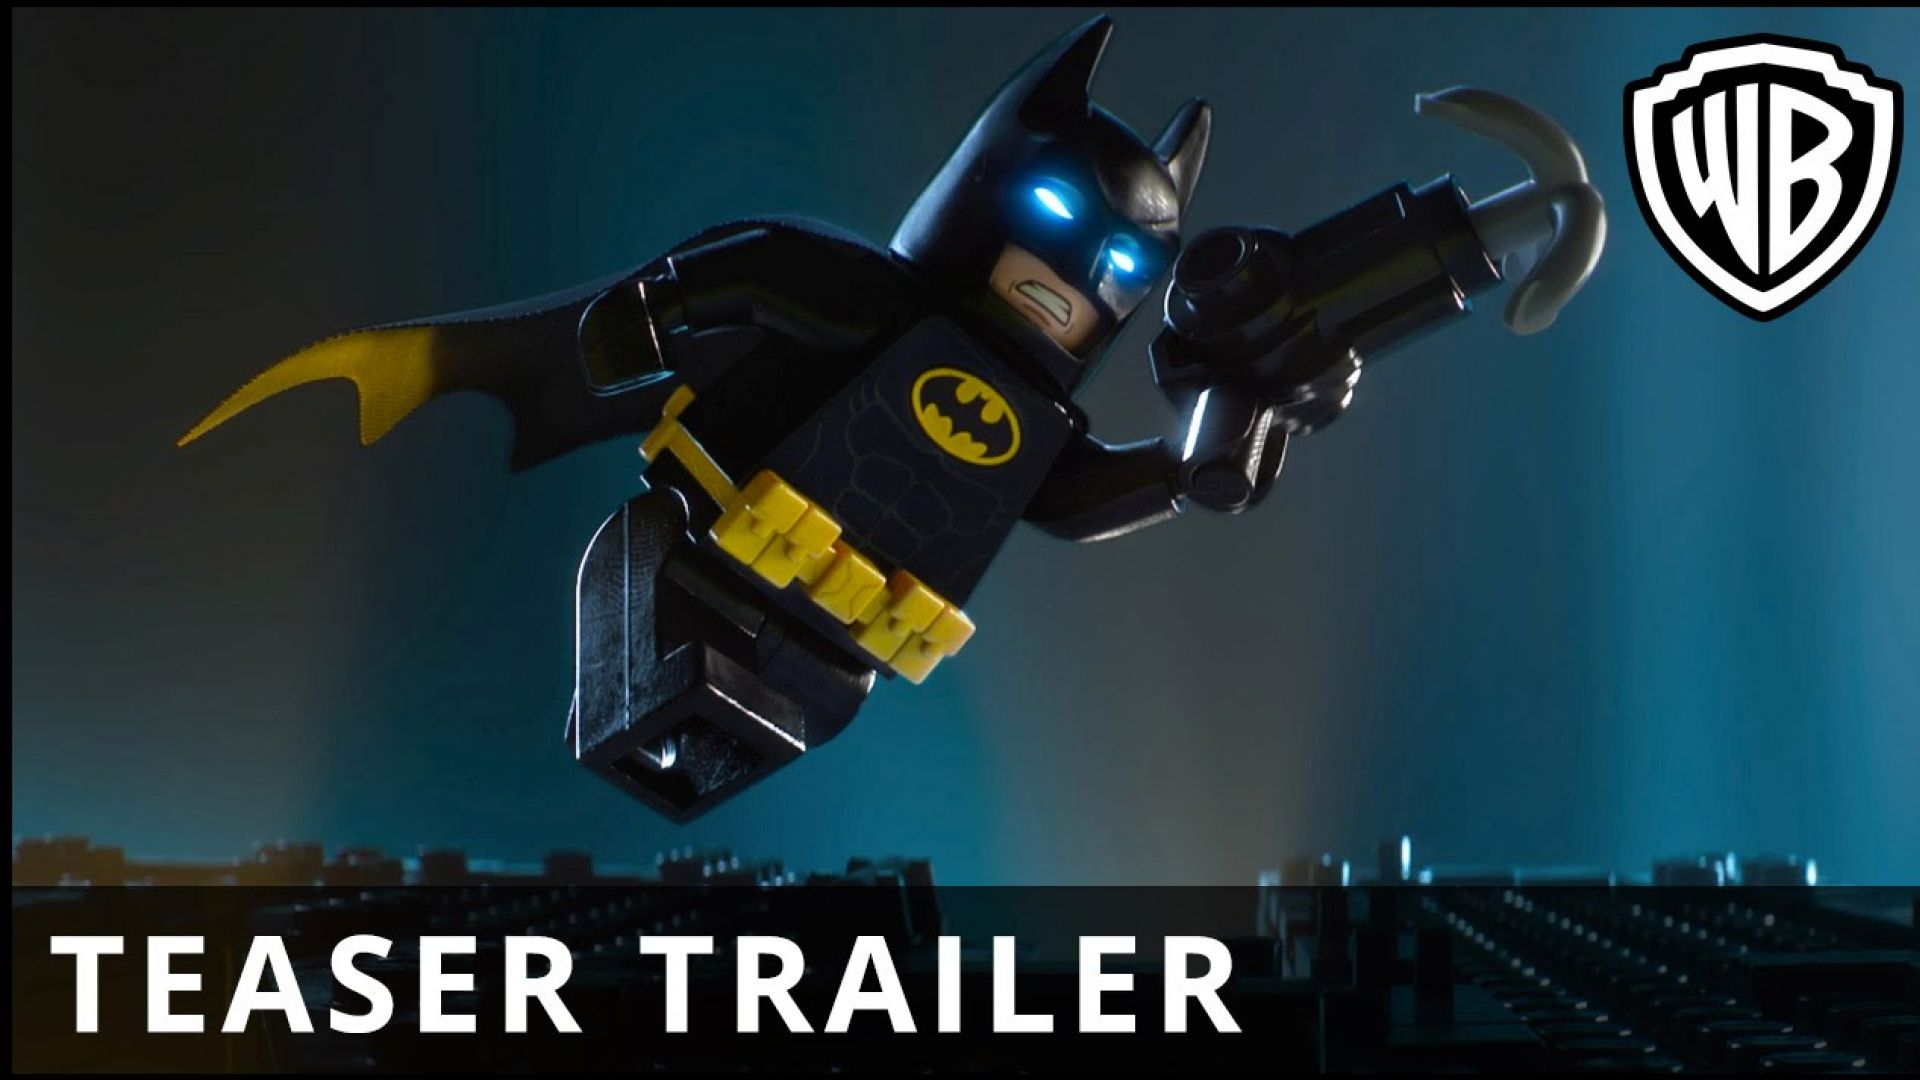 The Hilarious First Teaser Trailer for The Lego Batman Movie